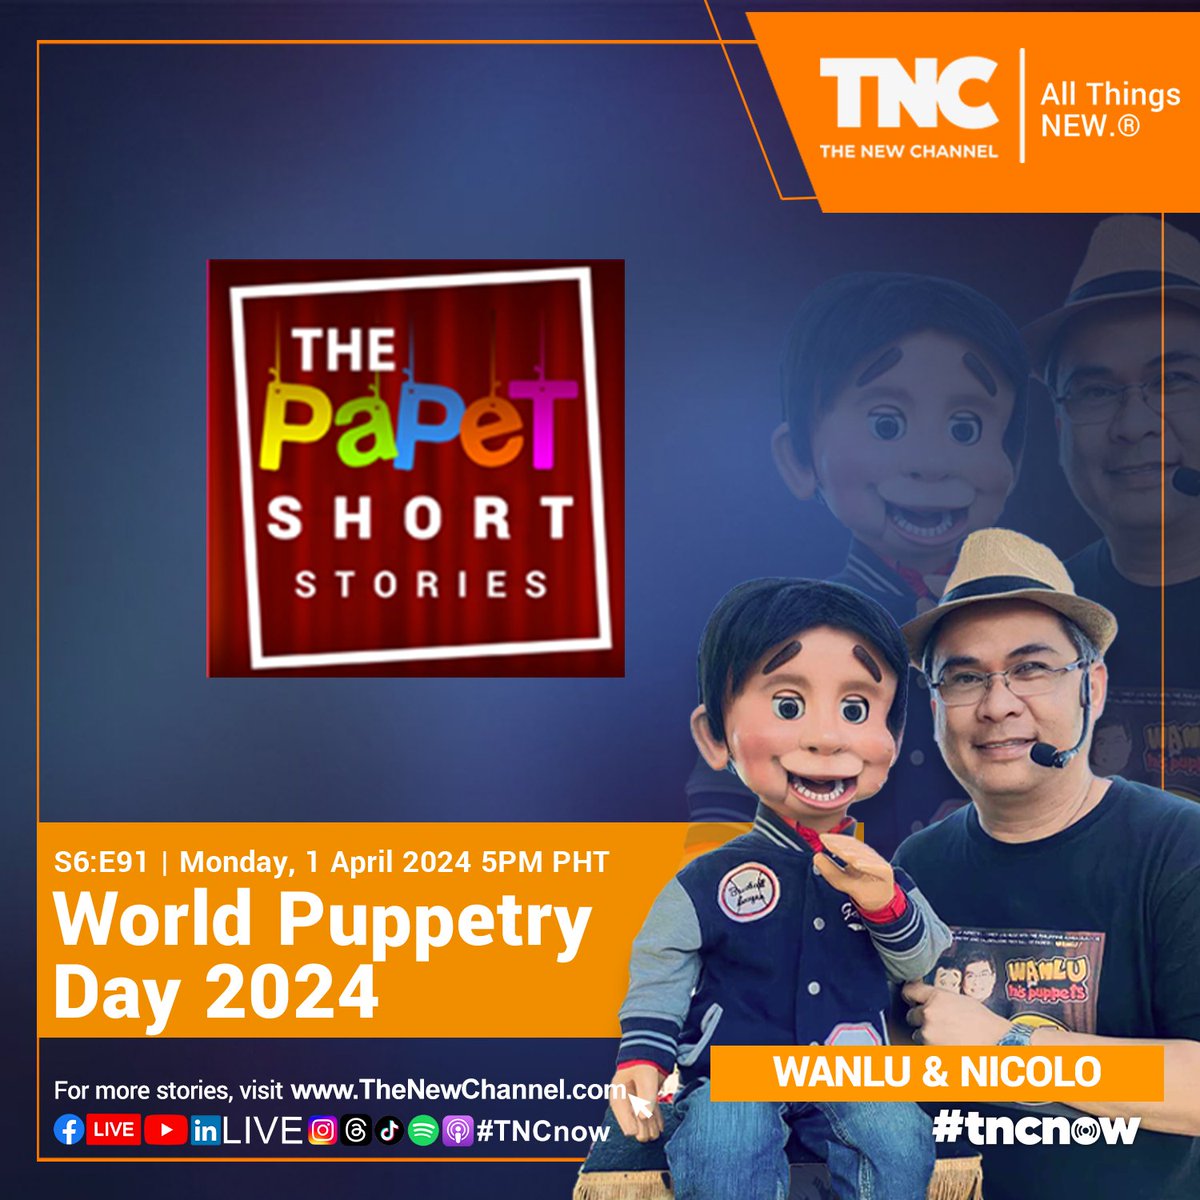 Watch S6:E91 | World Puppetry Day 2024 | The Papet Short Stories with Tito Wanlu and Nicolo

📌 YouTube (best to watch via your smart TV) - bit.ly/ThePapetShortS…

#onTNC #TNCnow #ThePapetShortStoriesOnTNC #TitoWanlu #WanluLunaria #Nicolo #WorldPuppetryDay #fypシ #ForYouPage